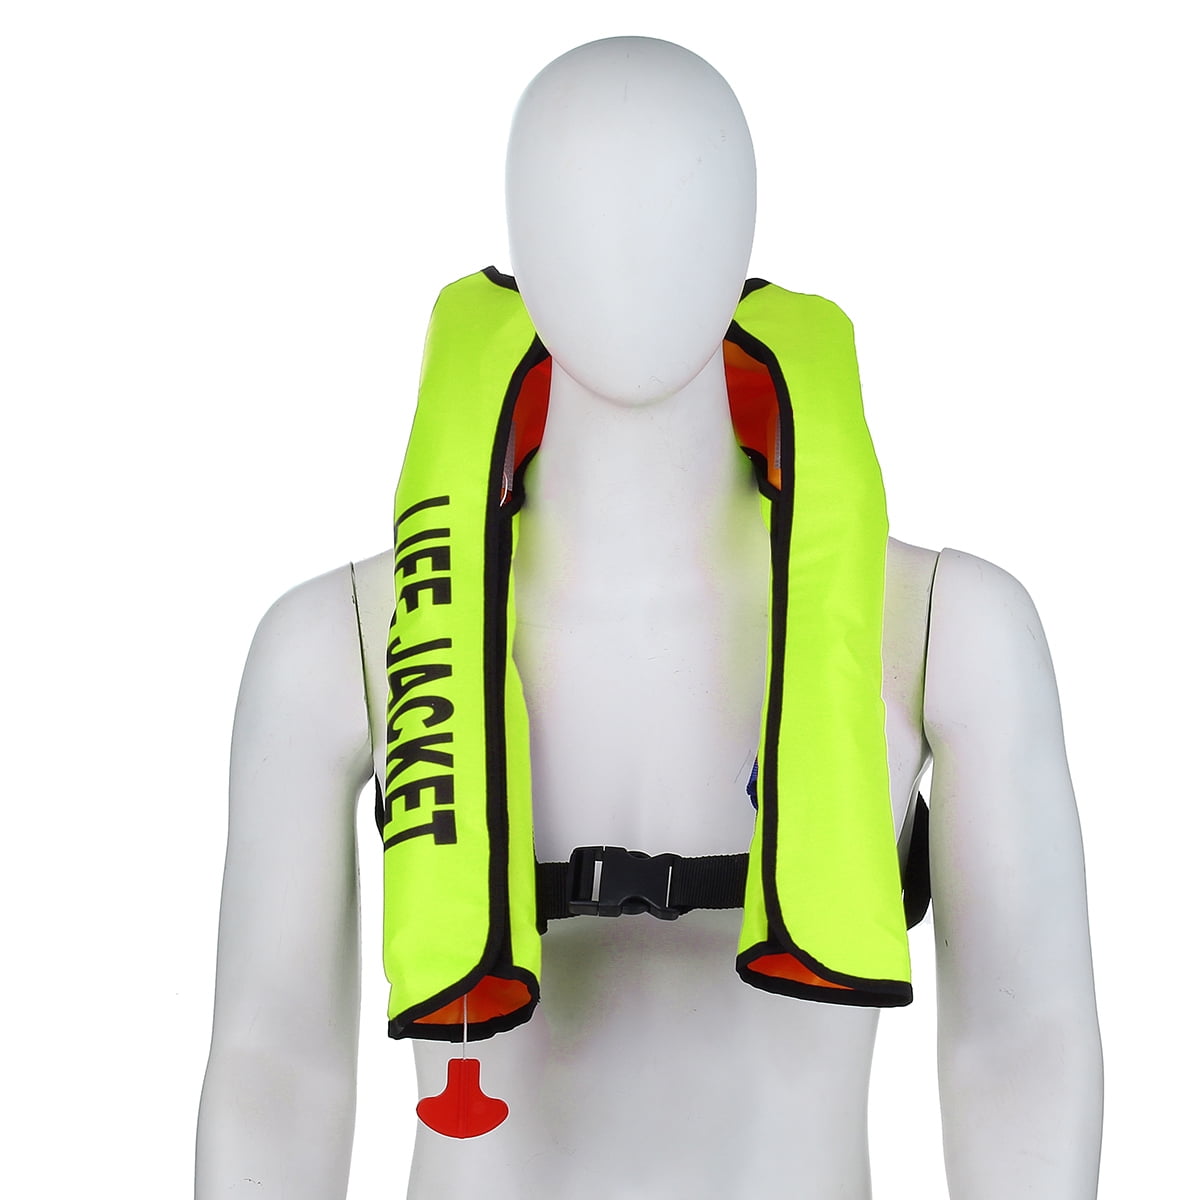 Automatic Floating Vest Life Jackets Swimsuit Training Wears Pool Accessories 